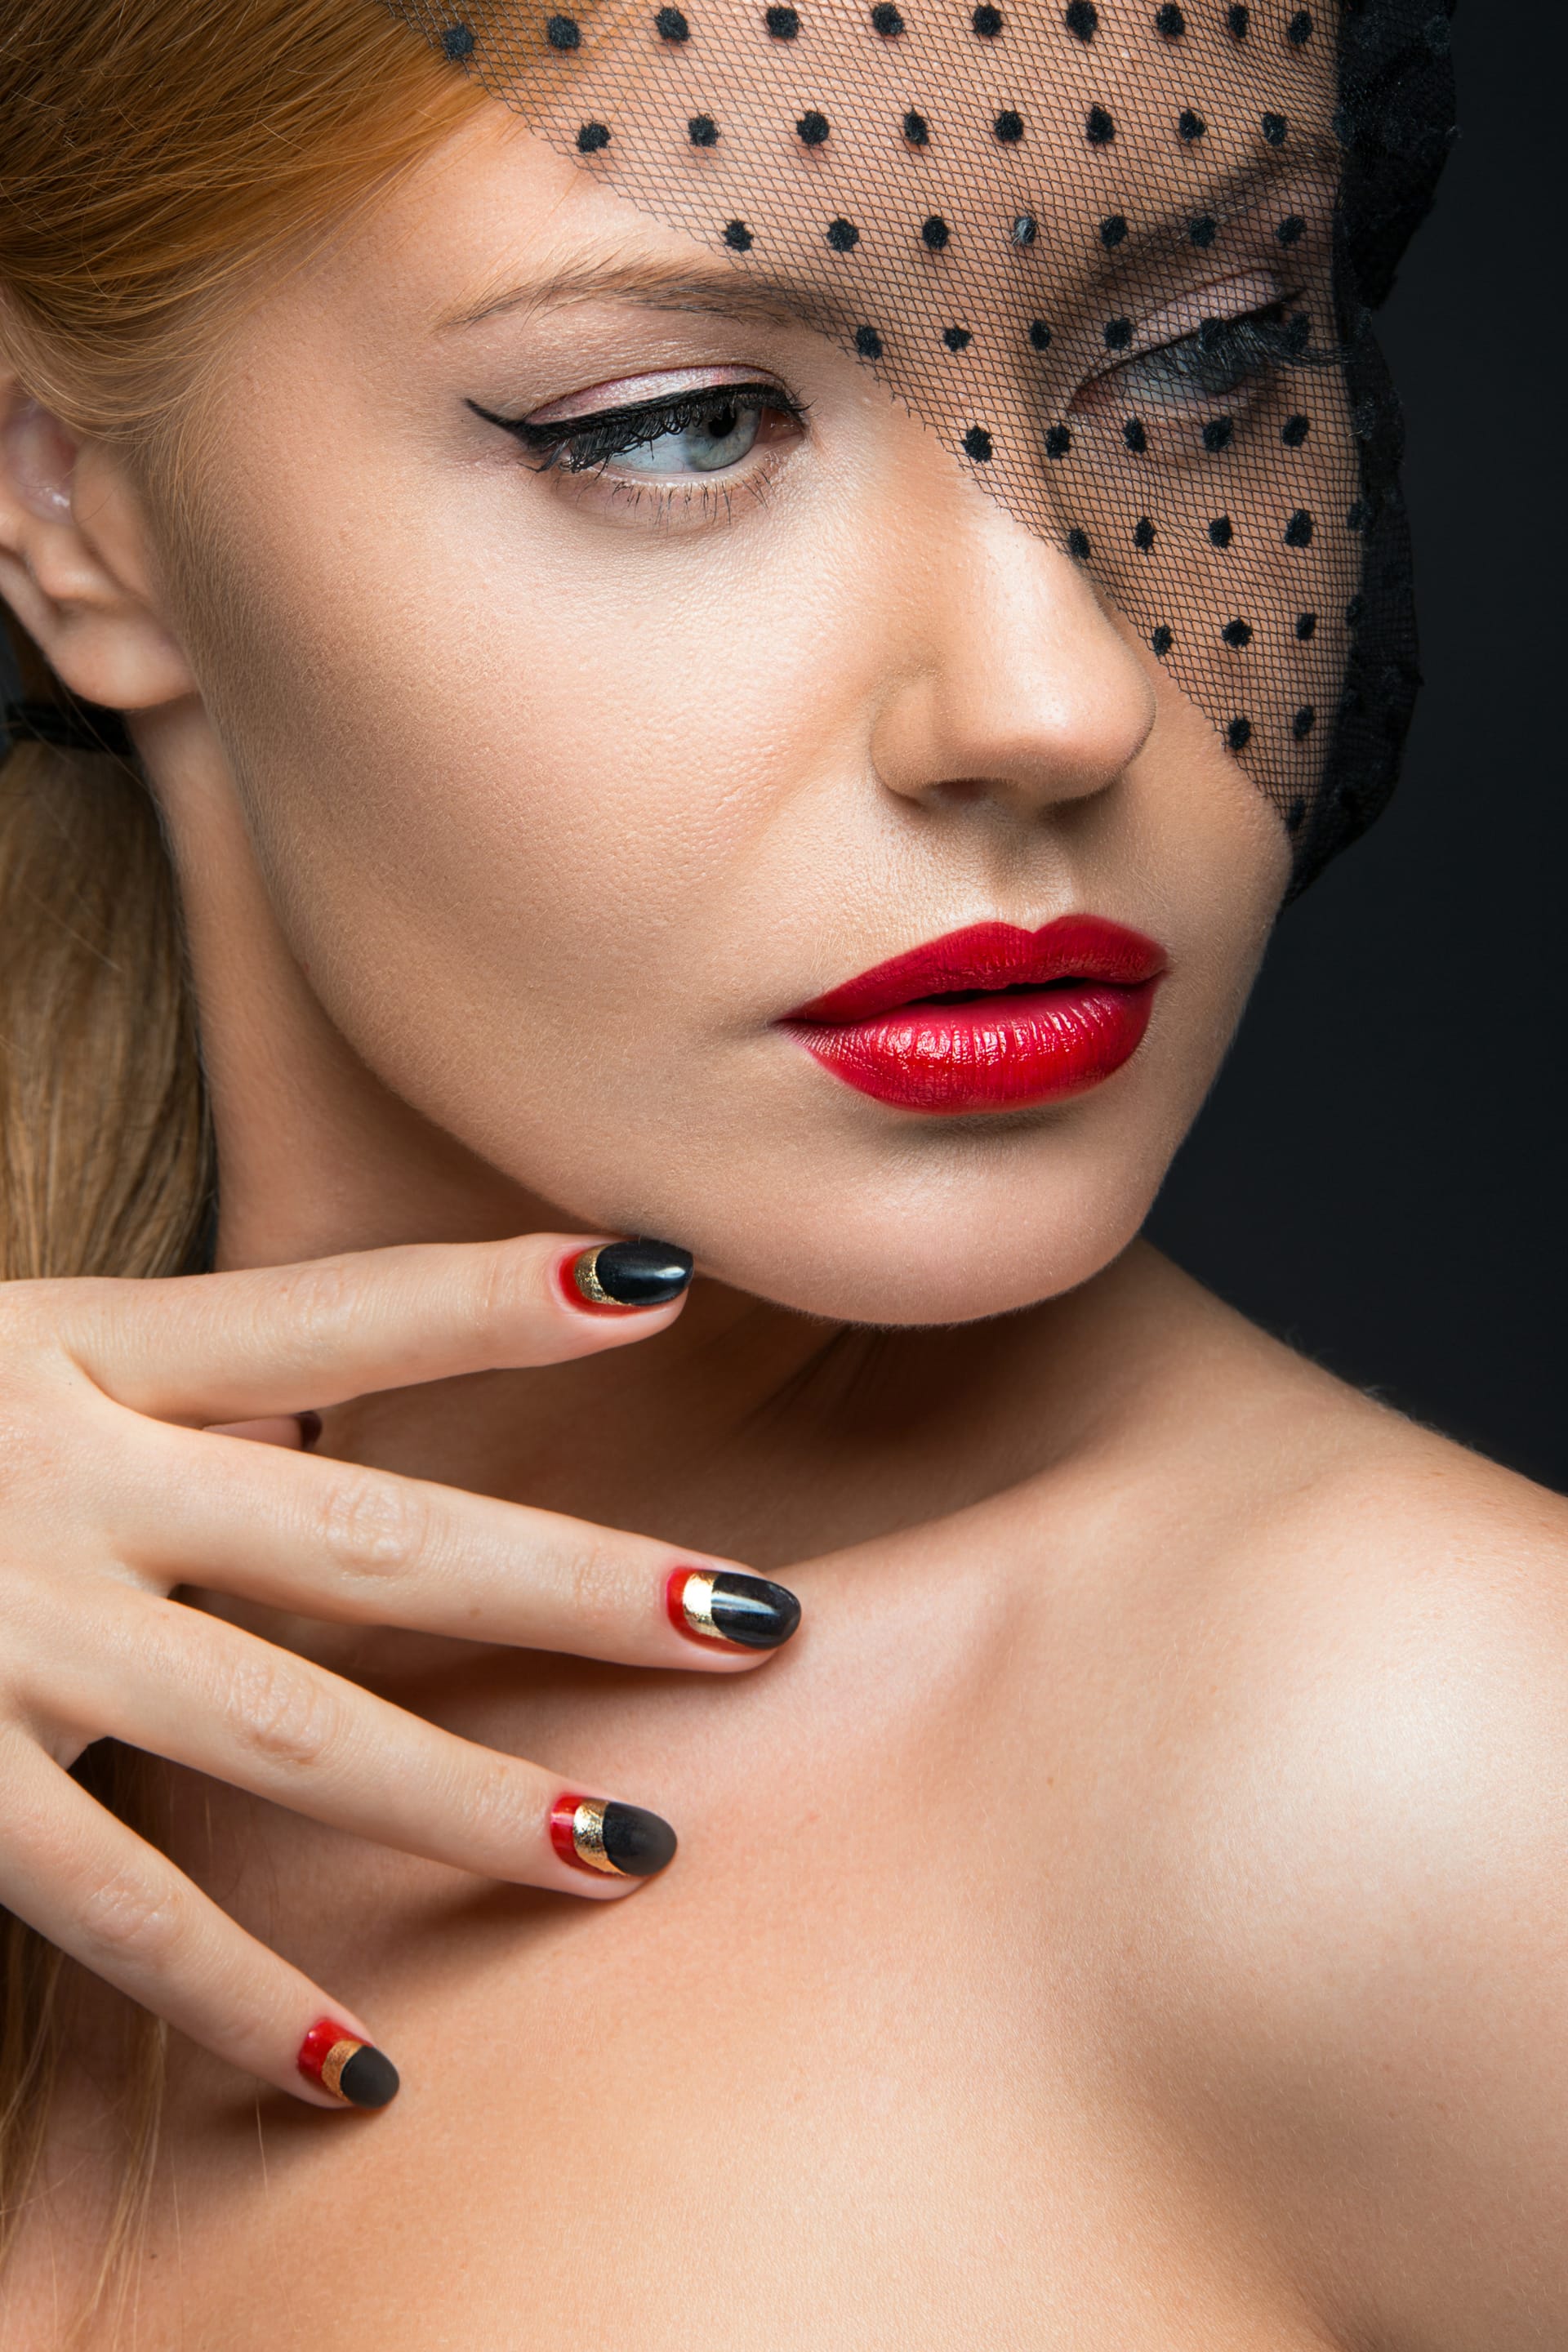 Girl with veil evening makeup black red nails